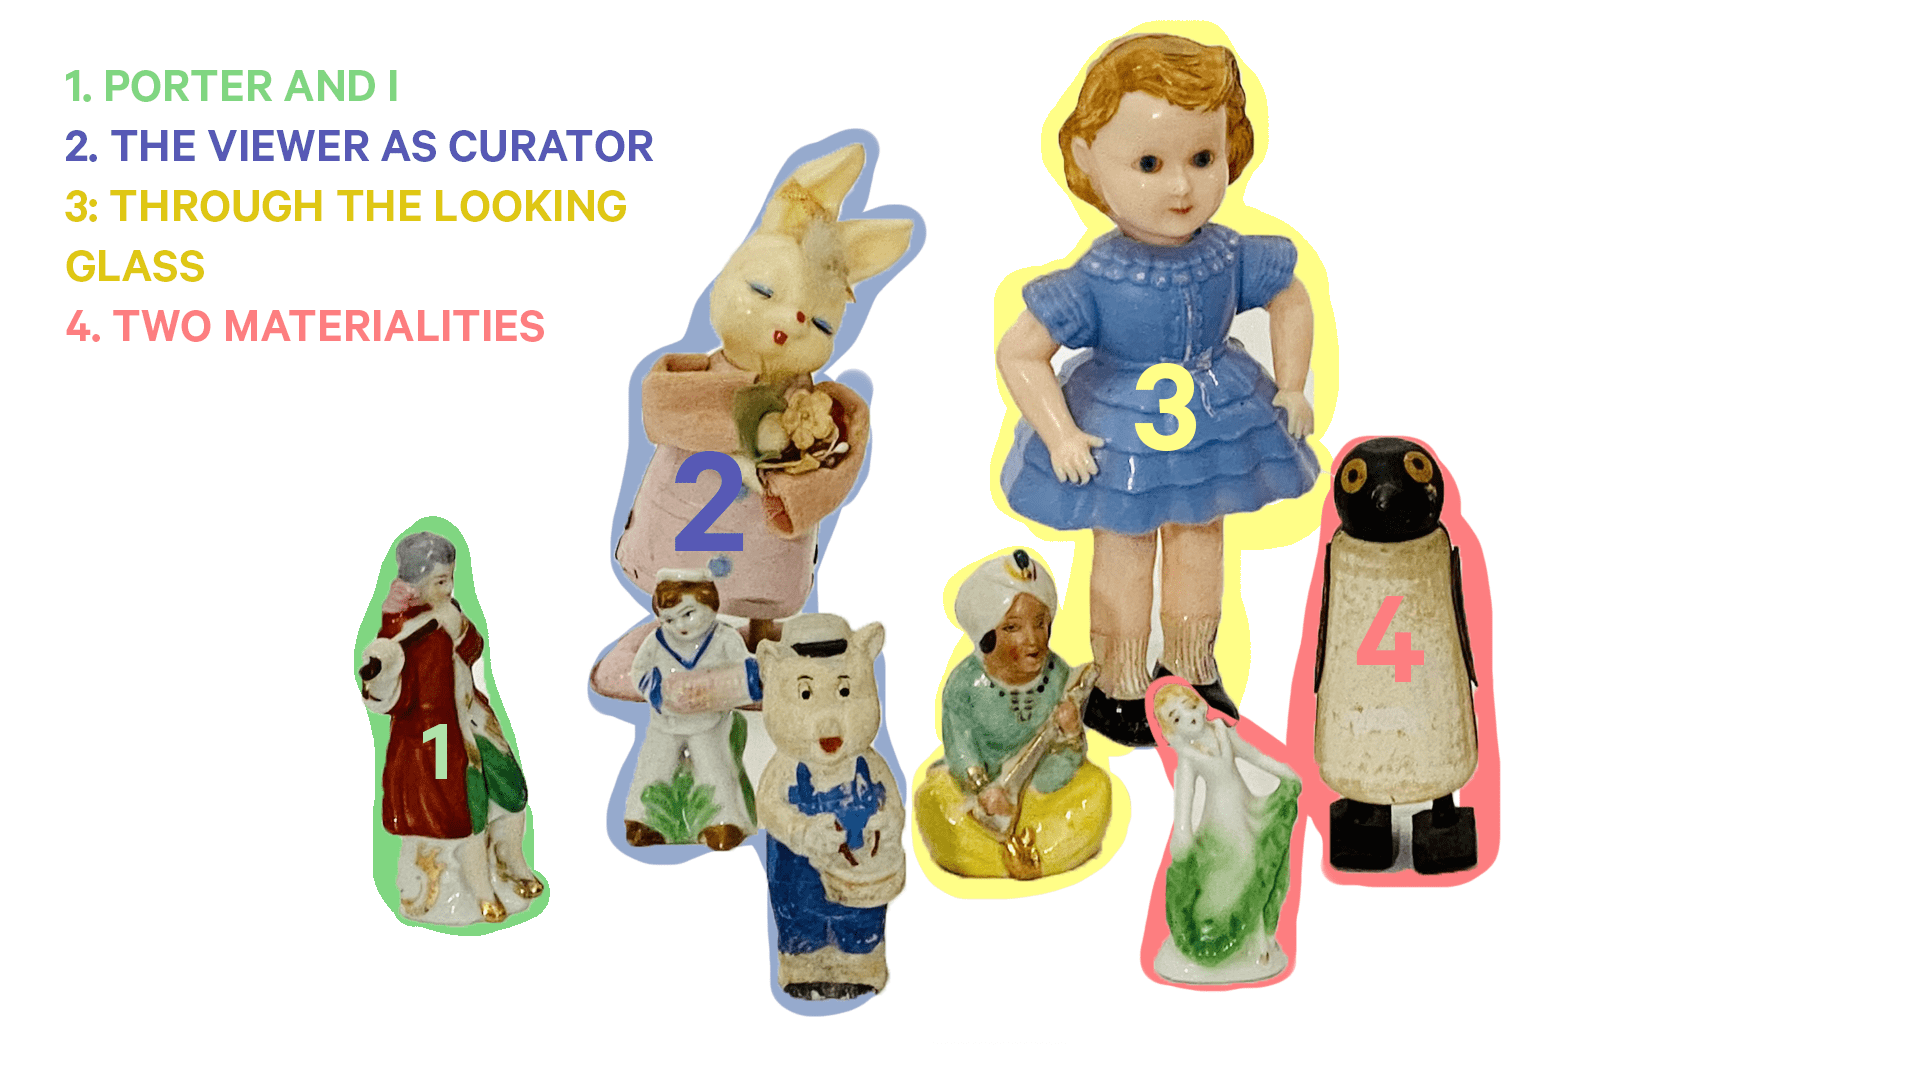 a selection of vintage toys from the artist, Liliana Porter's personal collection